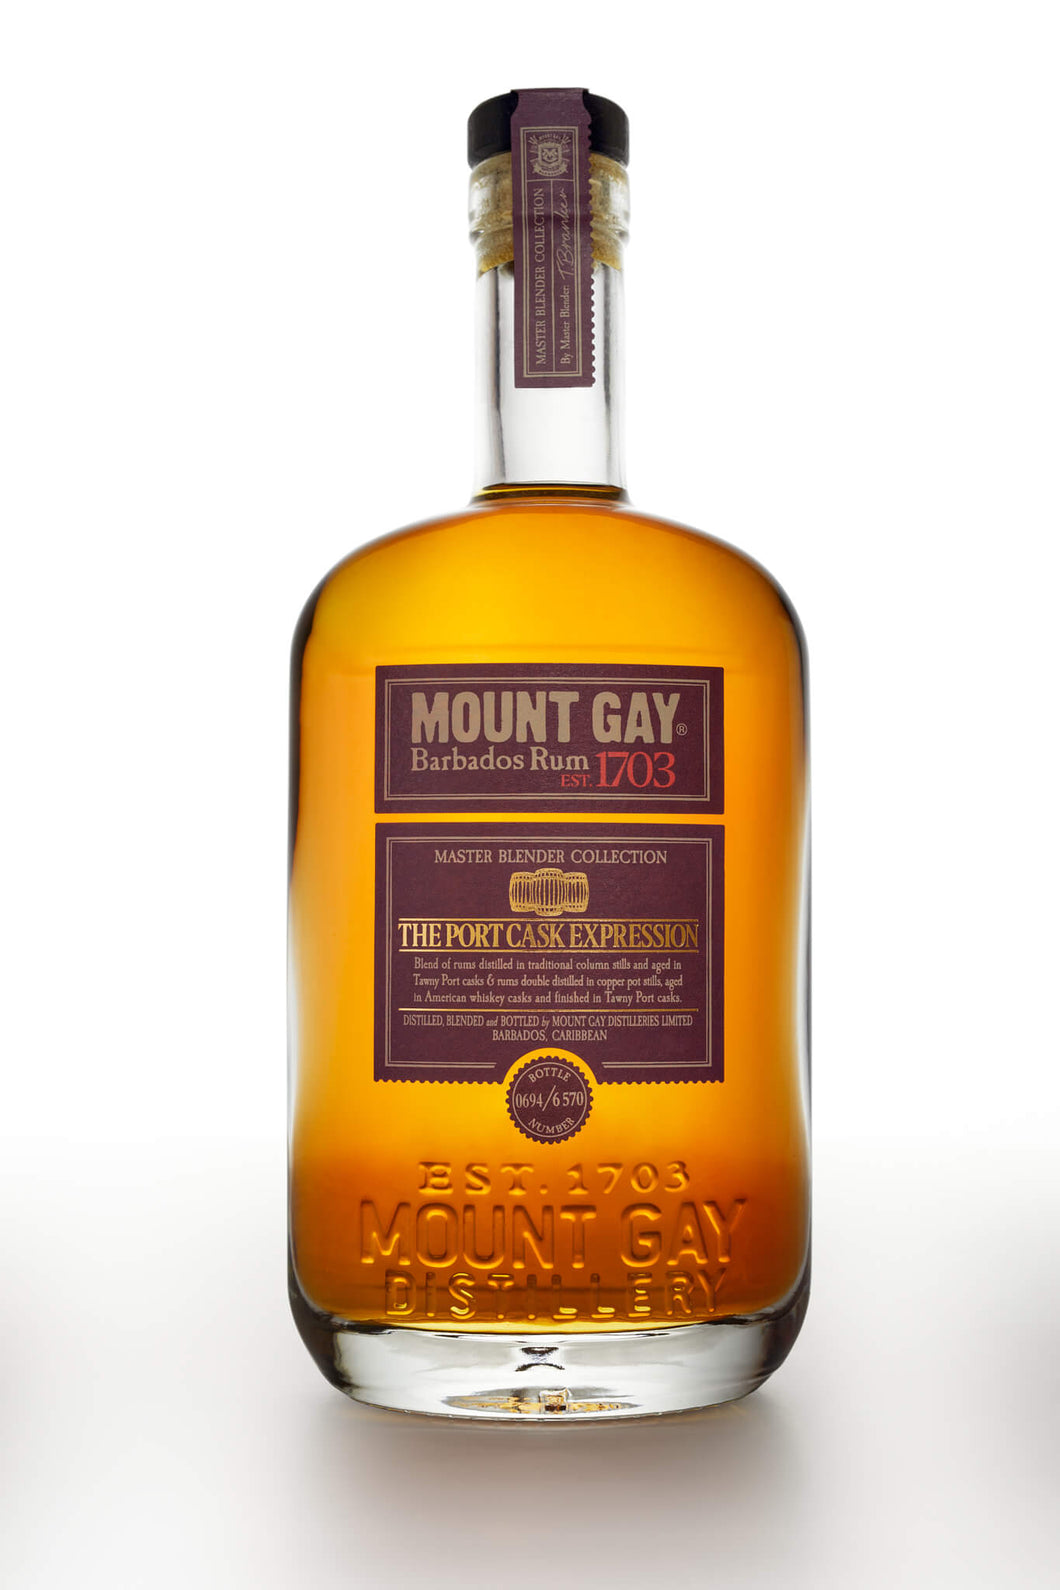 Mount Gay The Port Cask Expression